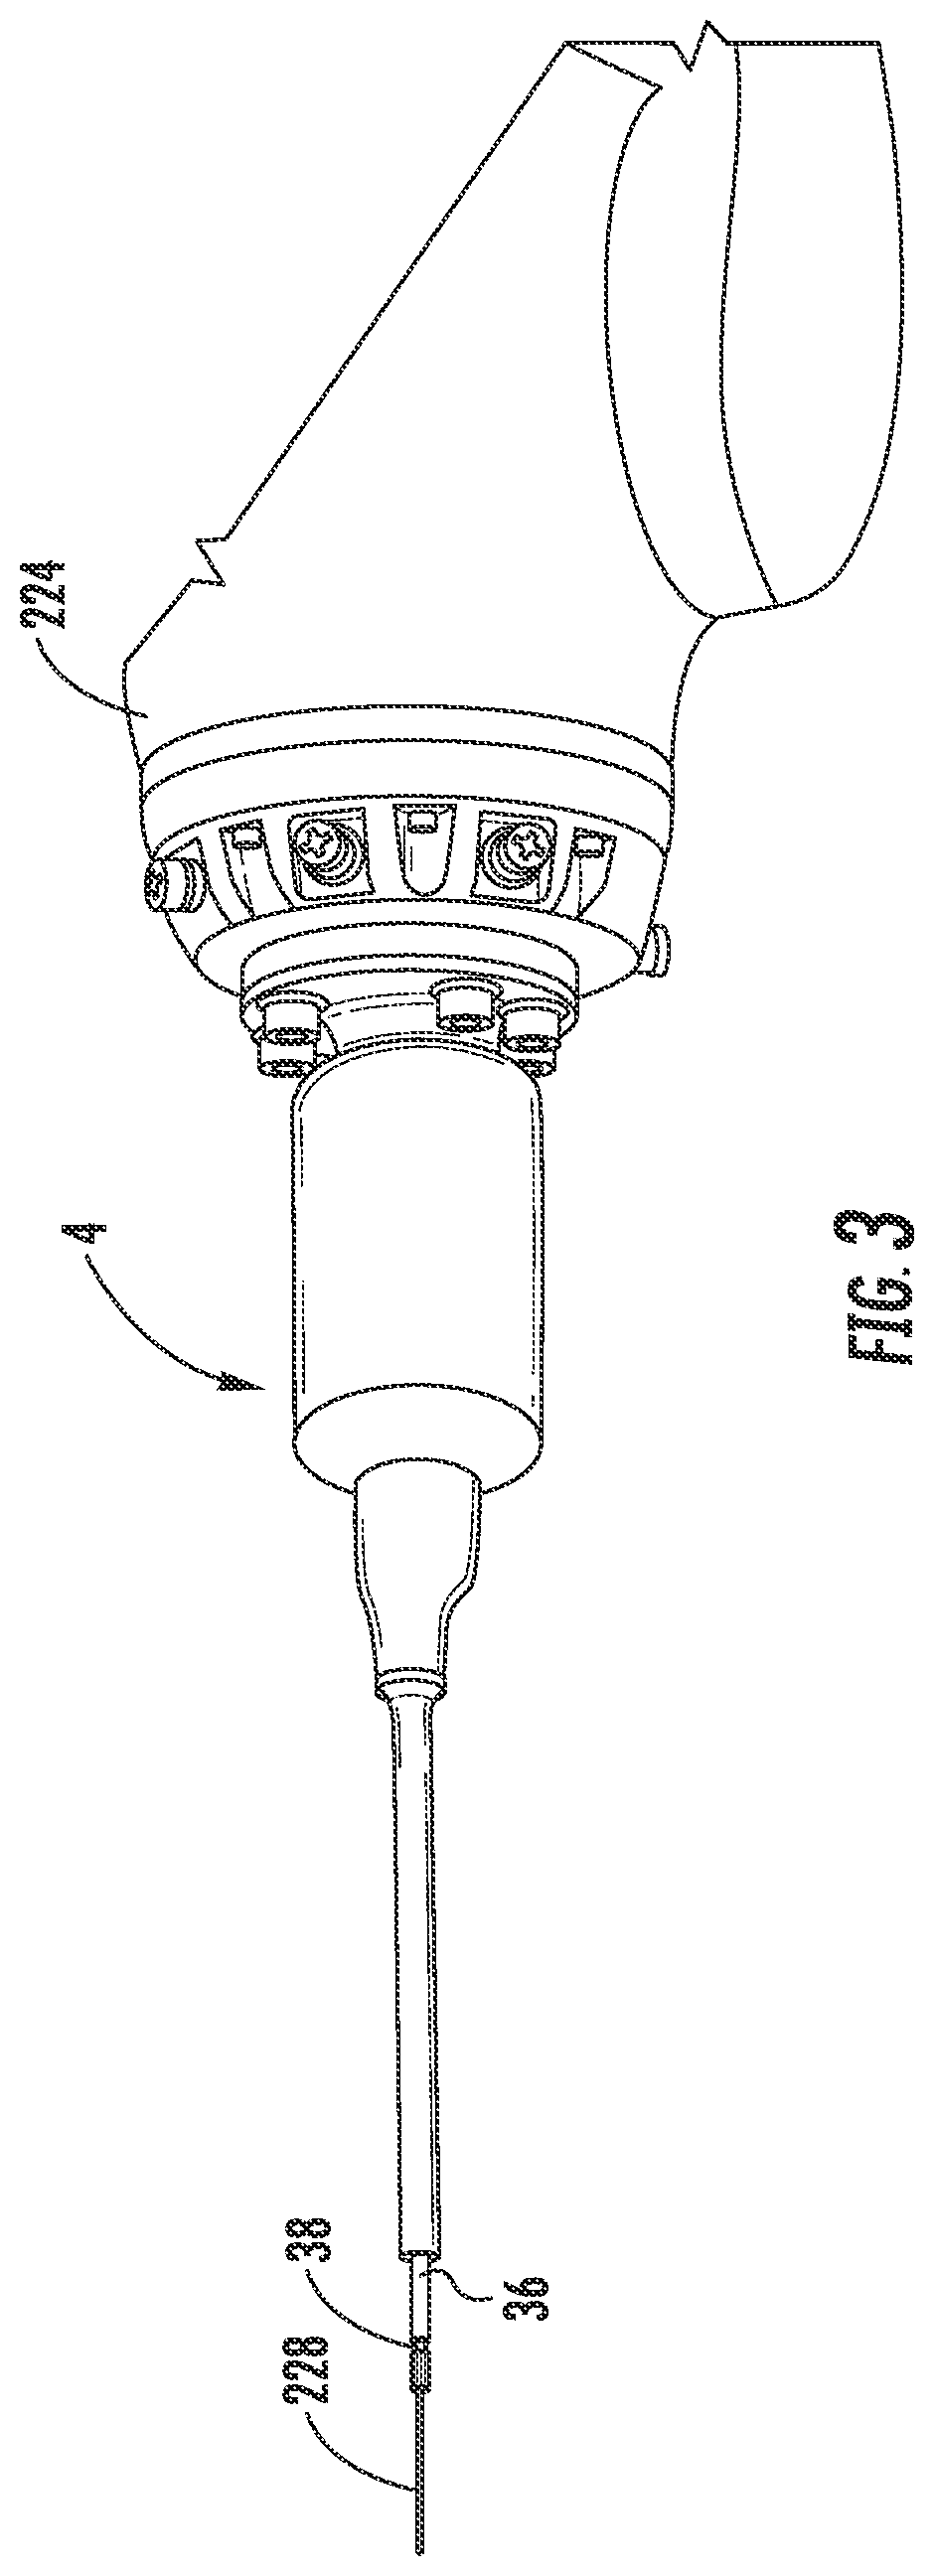 Robotic surgical system and method